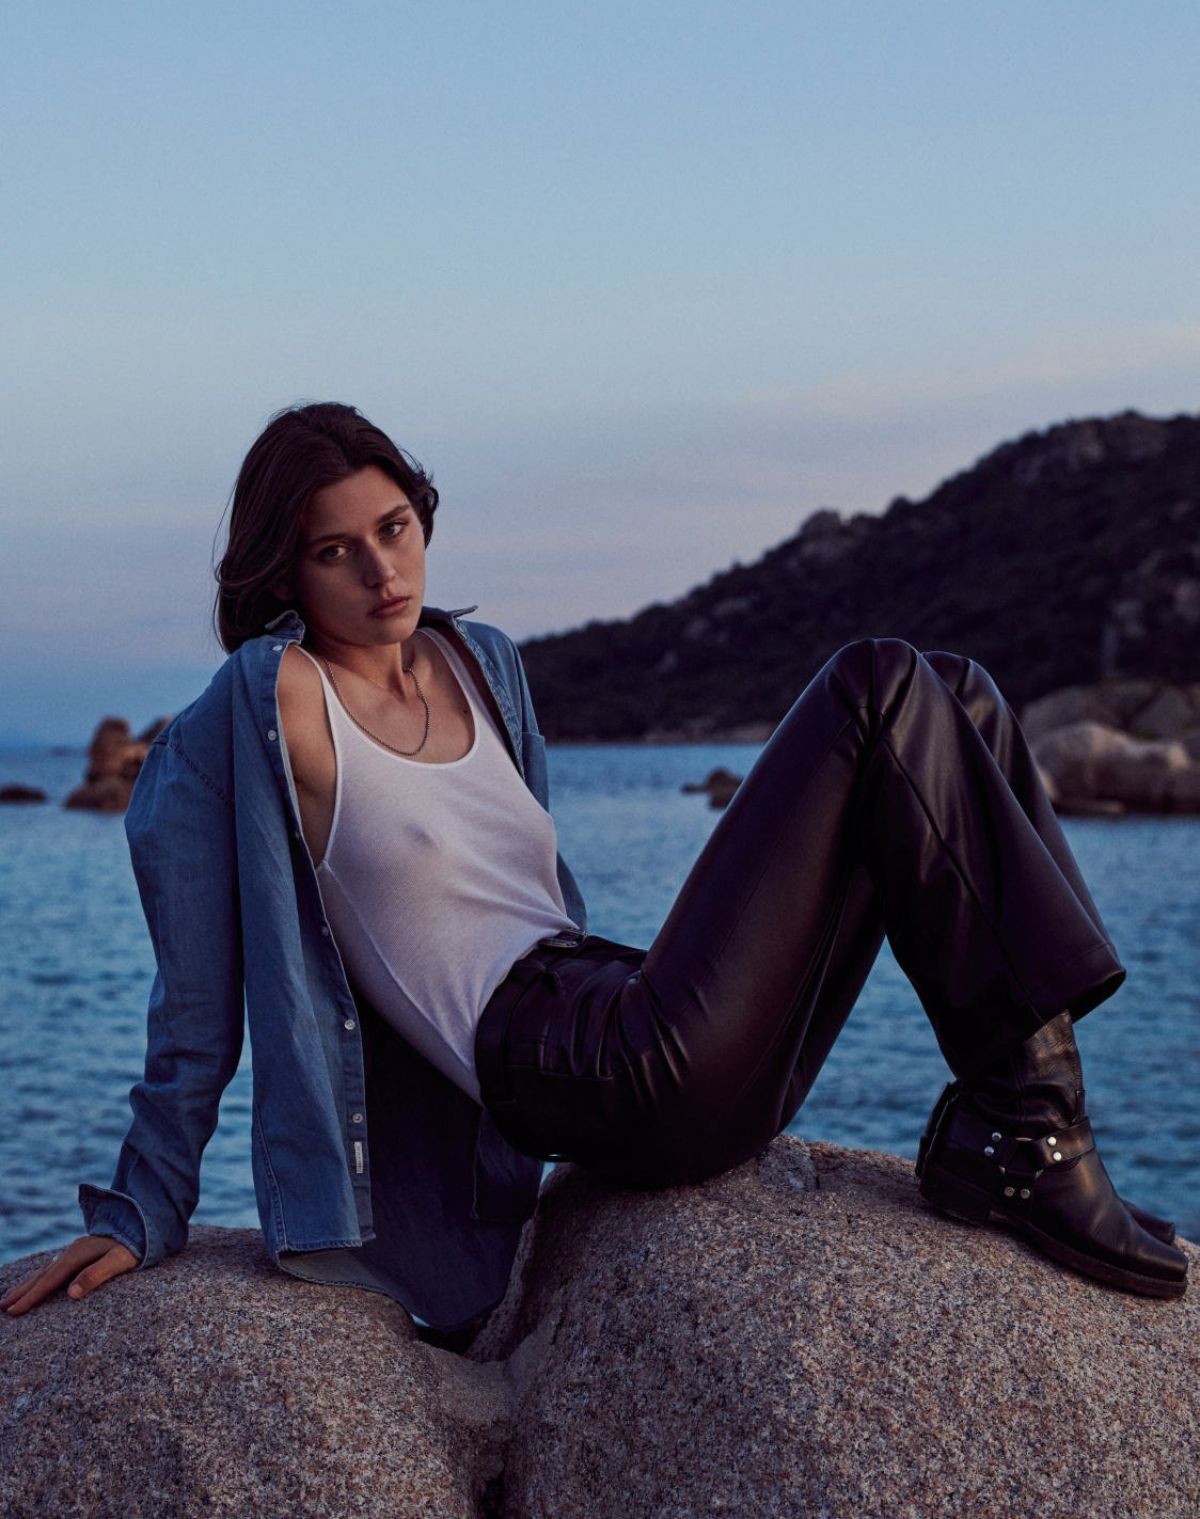 The Great Escape: Vivienne Rohner in Corsica by Bruno Staub for Vogue Paris August 2021. Clothing & Accessories: Denim Shirt by IKKS Men; Tank Top by Majestic Filatures; Vegan Leather Trousers by Chapel; Belt by Harpo x Beige Habilleur; Leather Boots by Re/Done